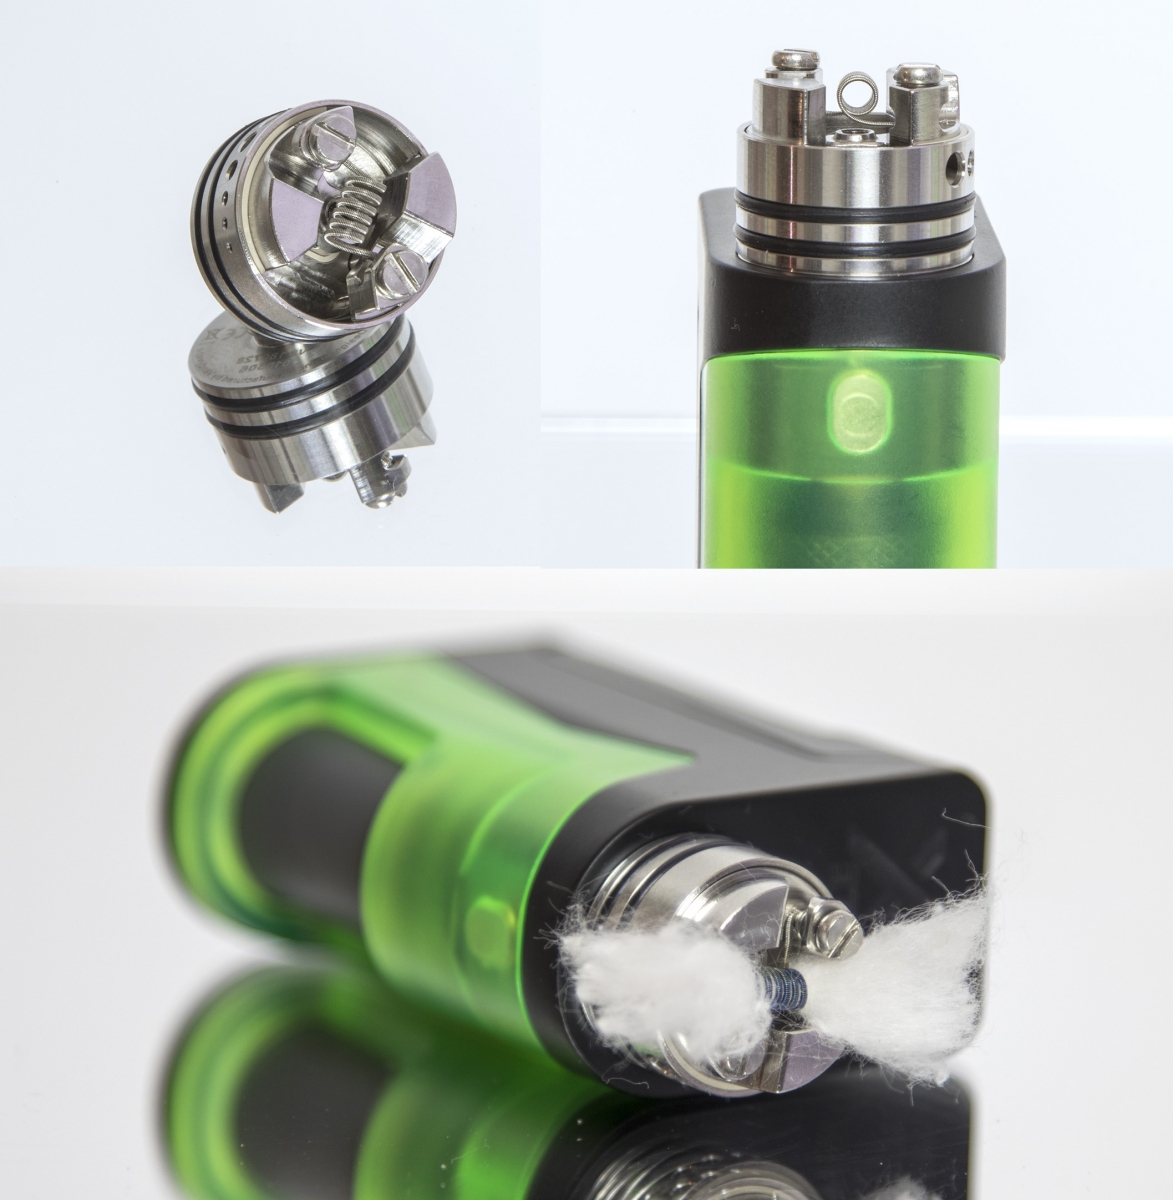 Vapefly Holic with coil